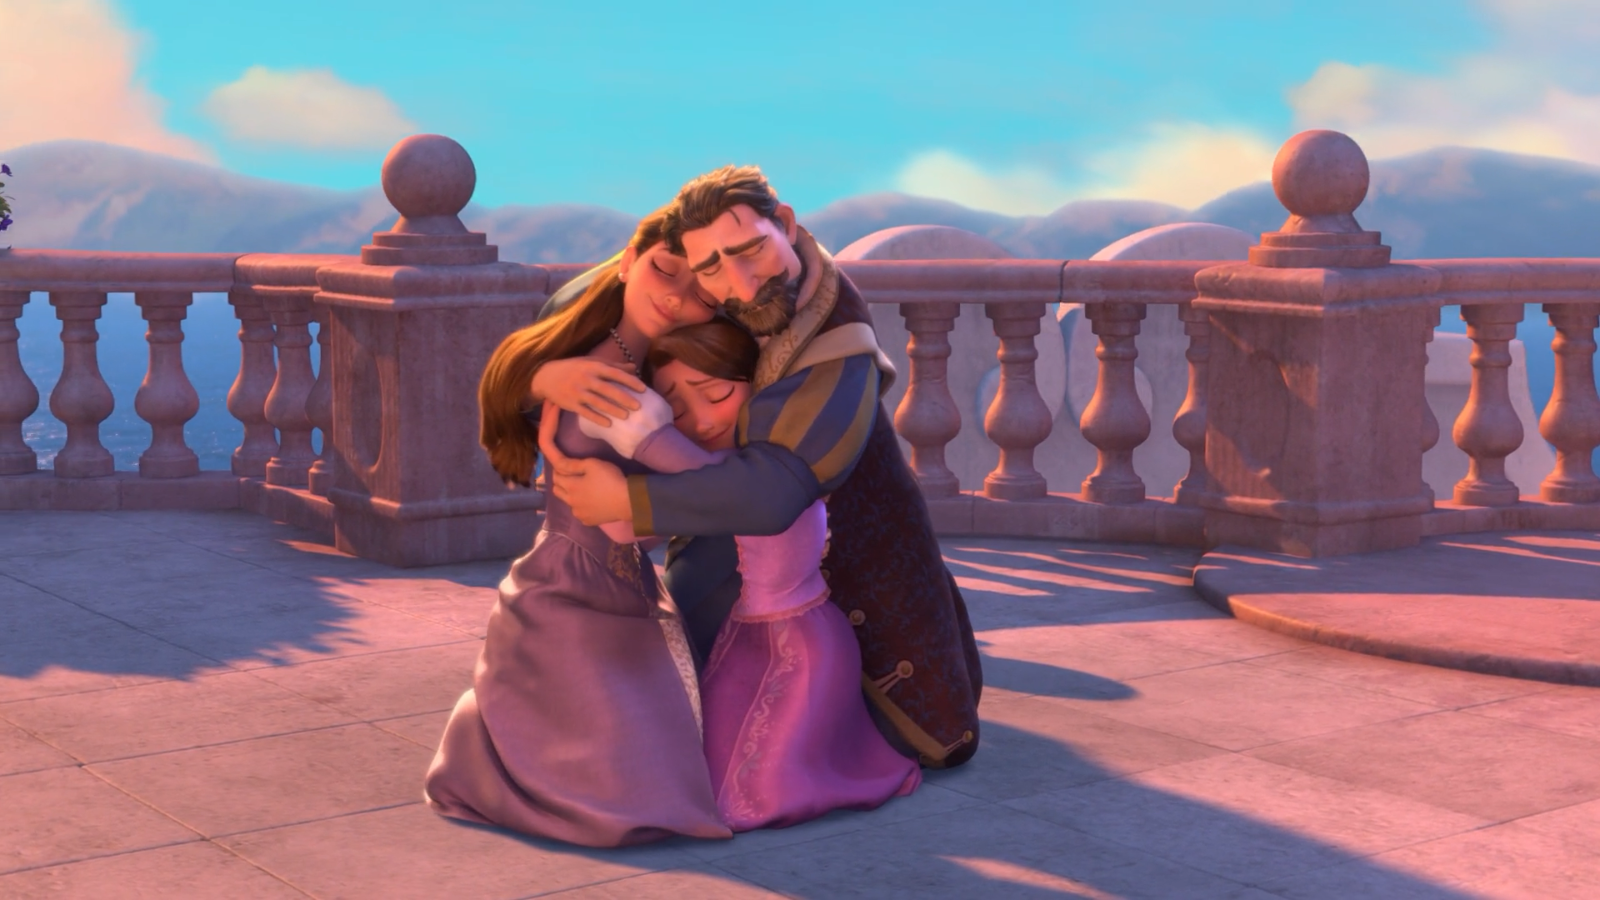 Tangled Movie Review